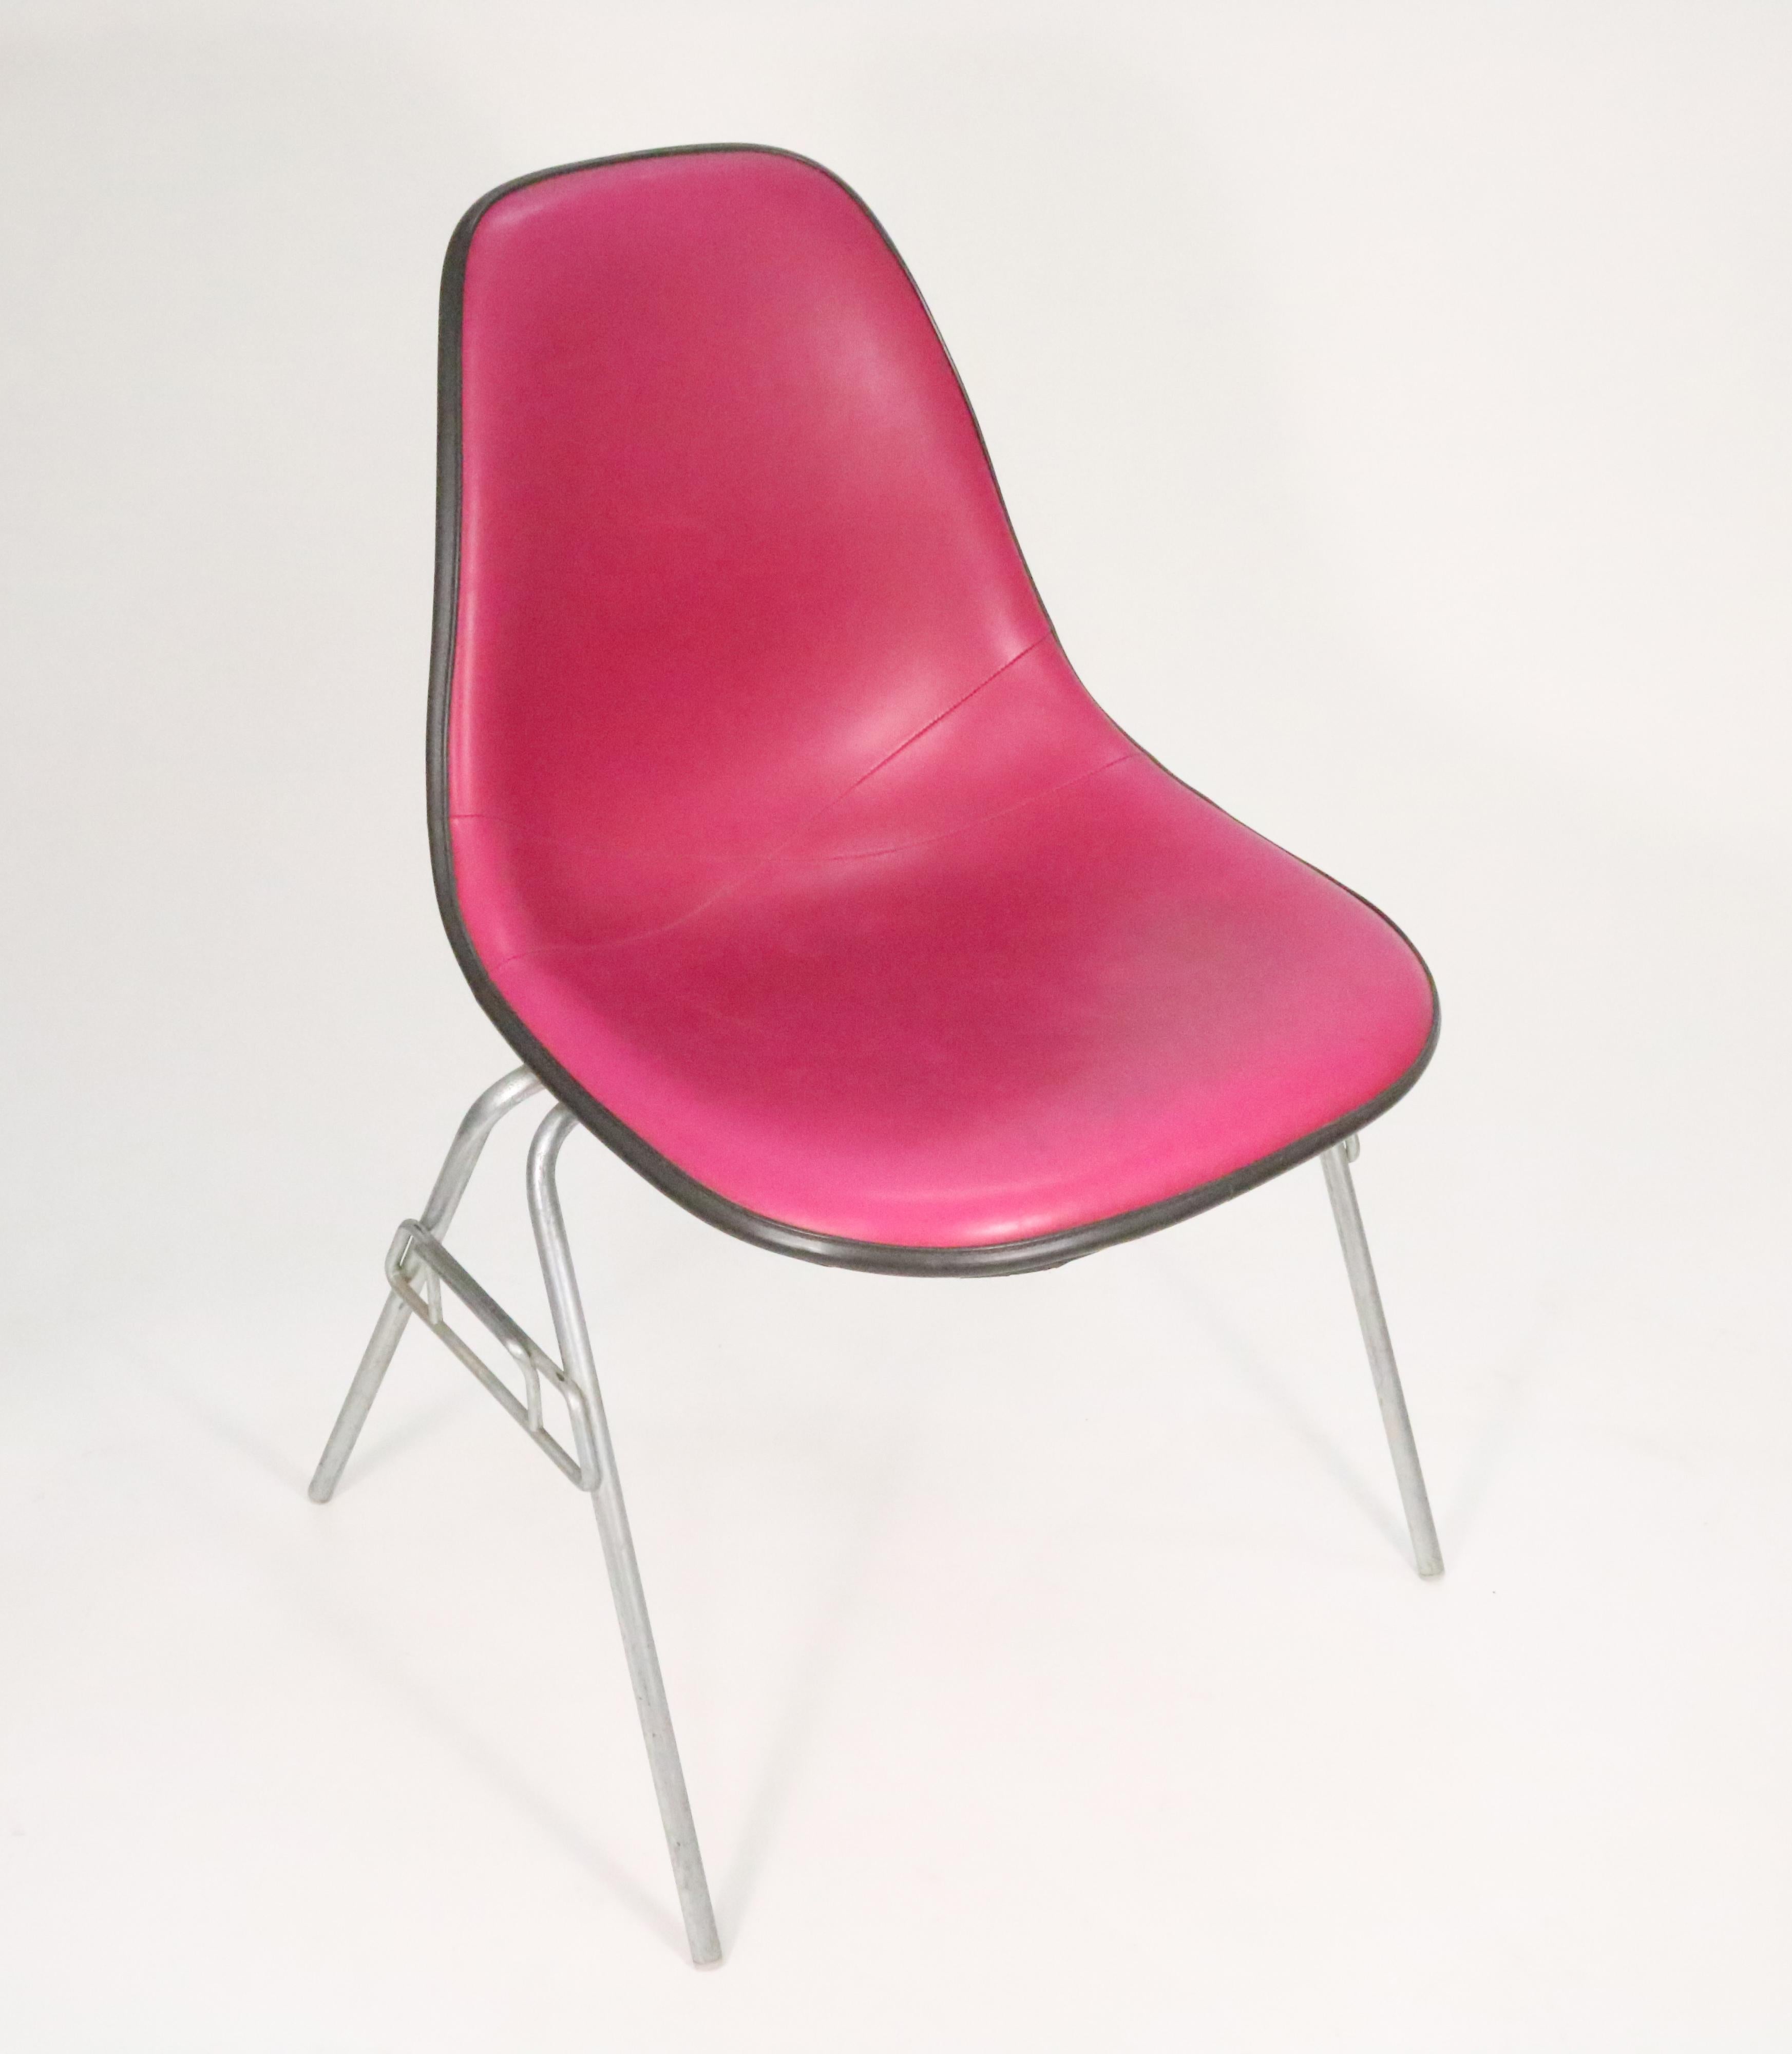 An eye-catching edition of Charles and Ray Eames' molded fiberglass side chair upholstered in bright pink vinyl with original DSS stackable cast aluminum base.